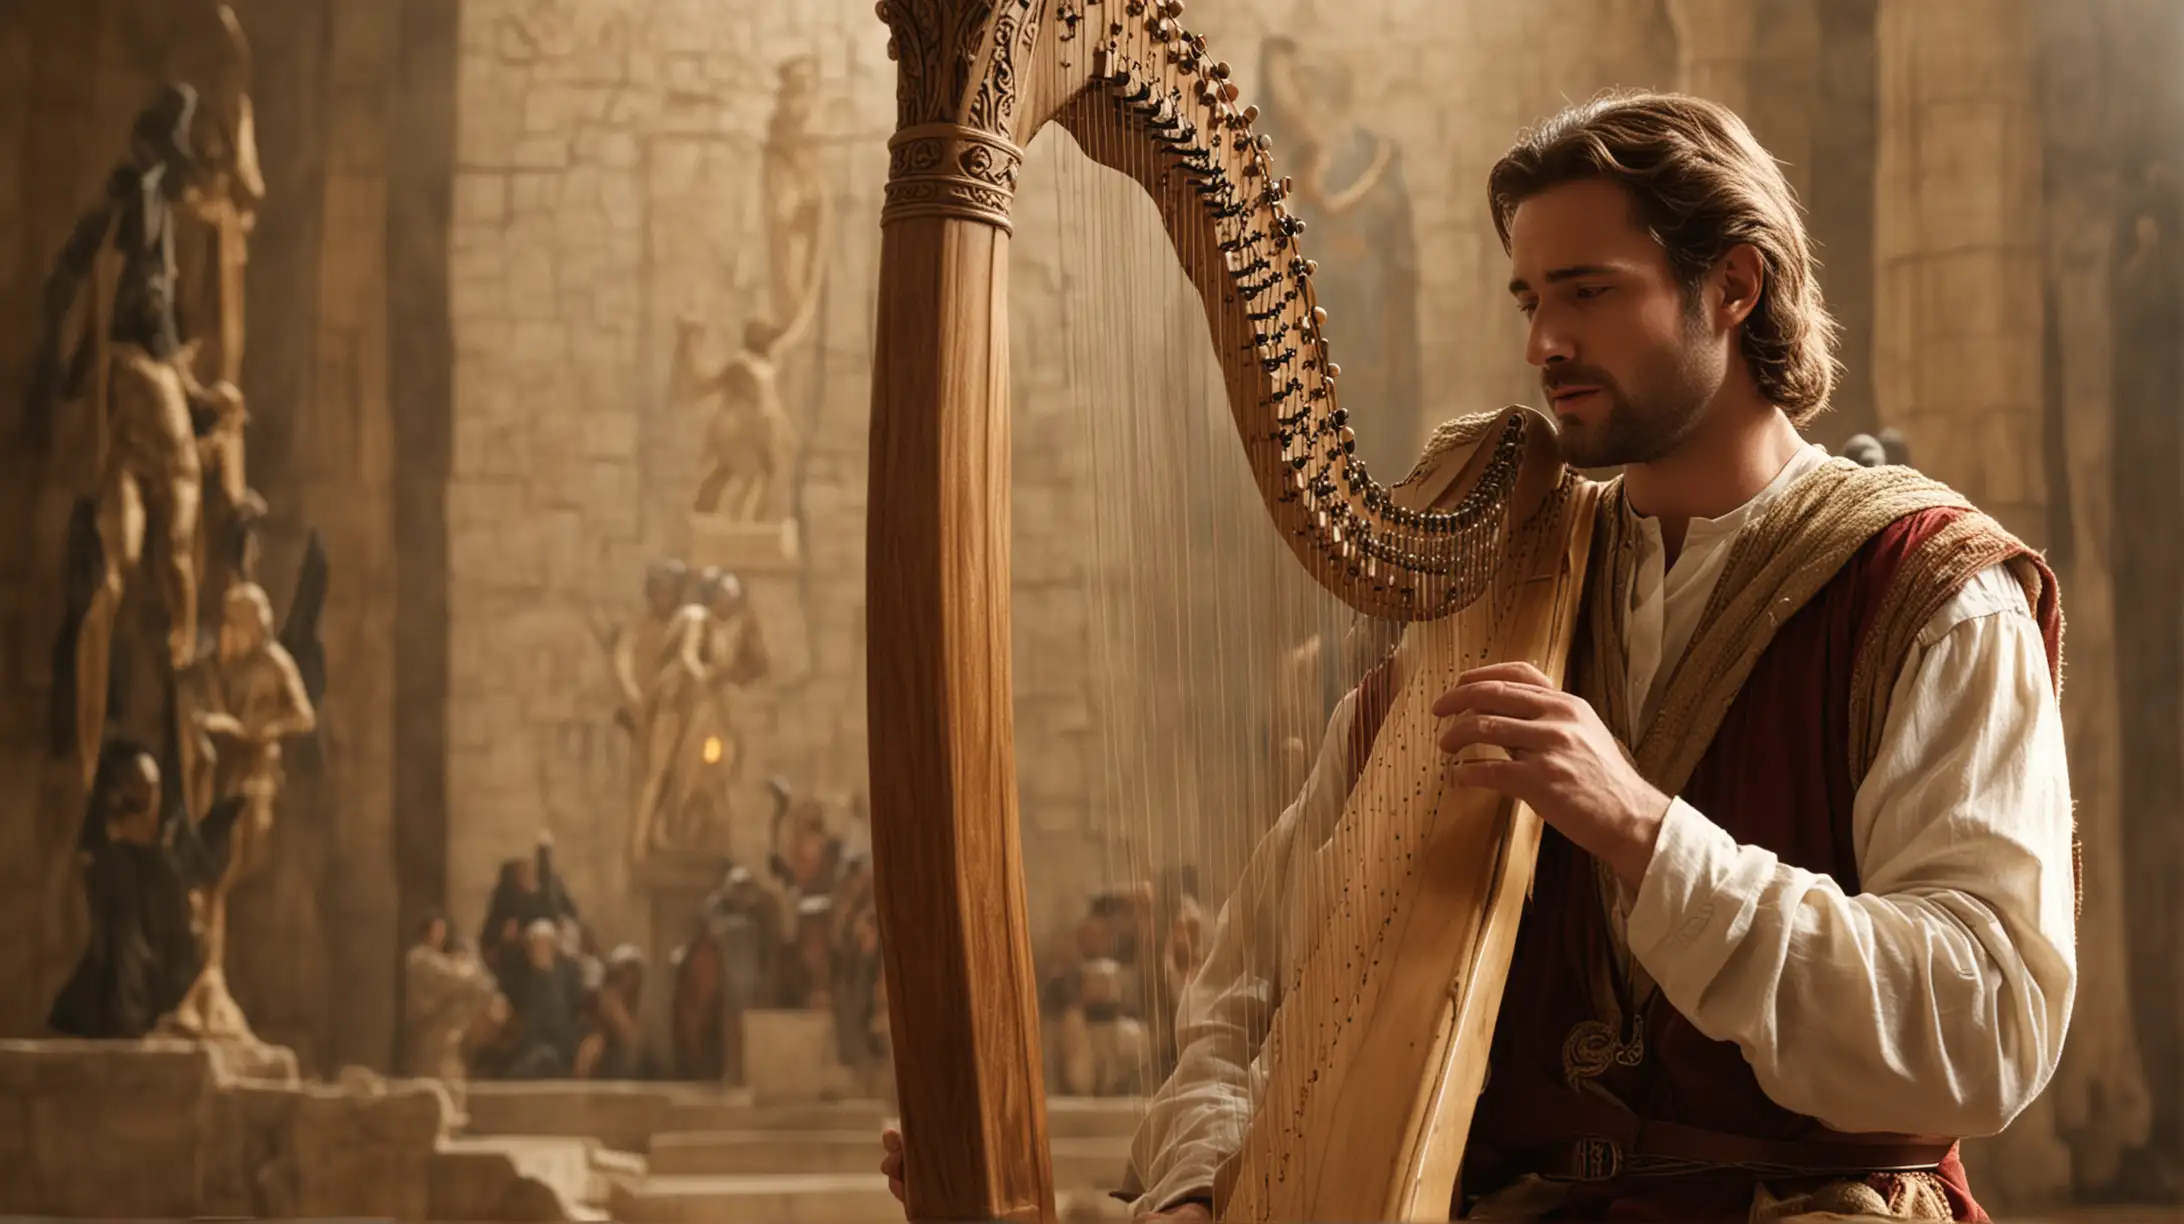 A handsome man playing a harp in front of the king Saul. Set during the biblical era of King David.